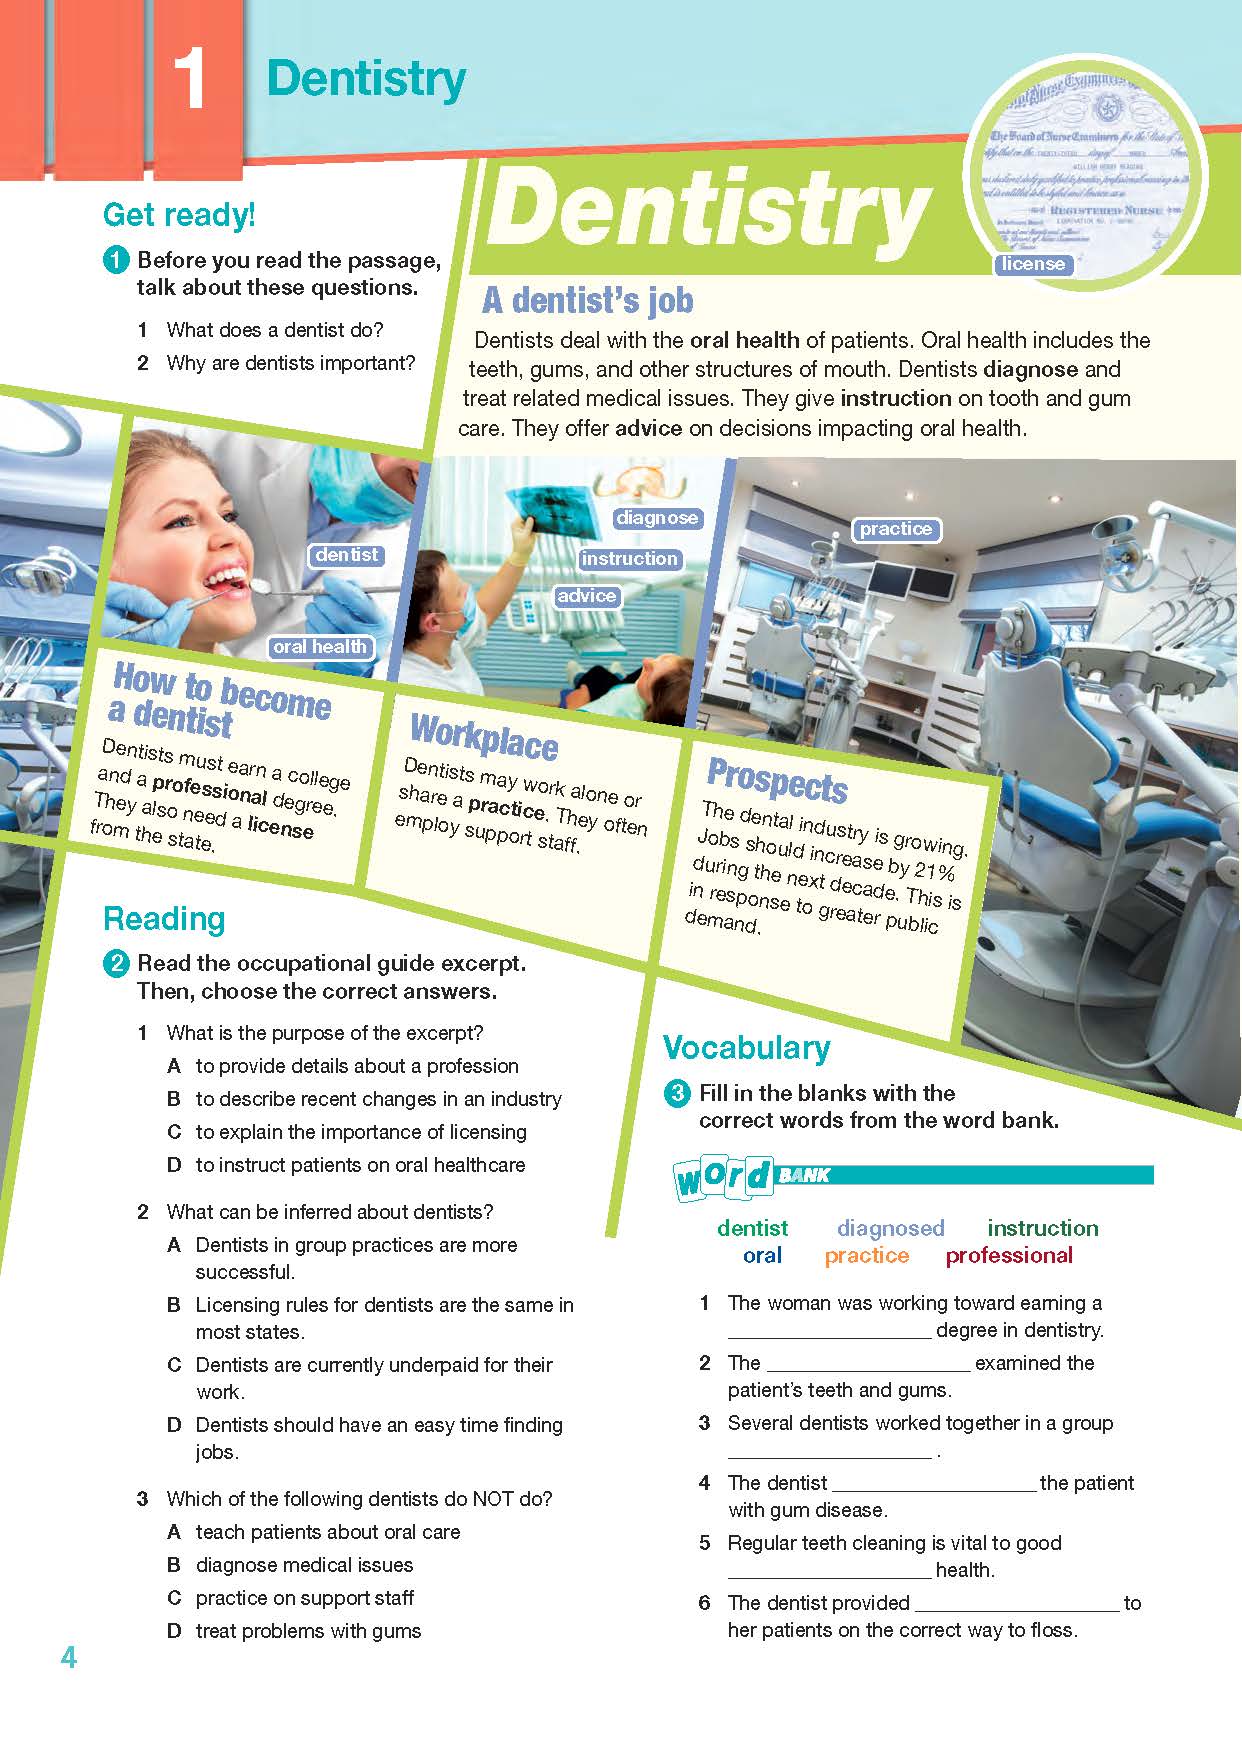 ESP English for Specific Purposes - Career Paths: Dentistry - Sample Page 1